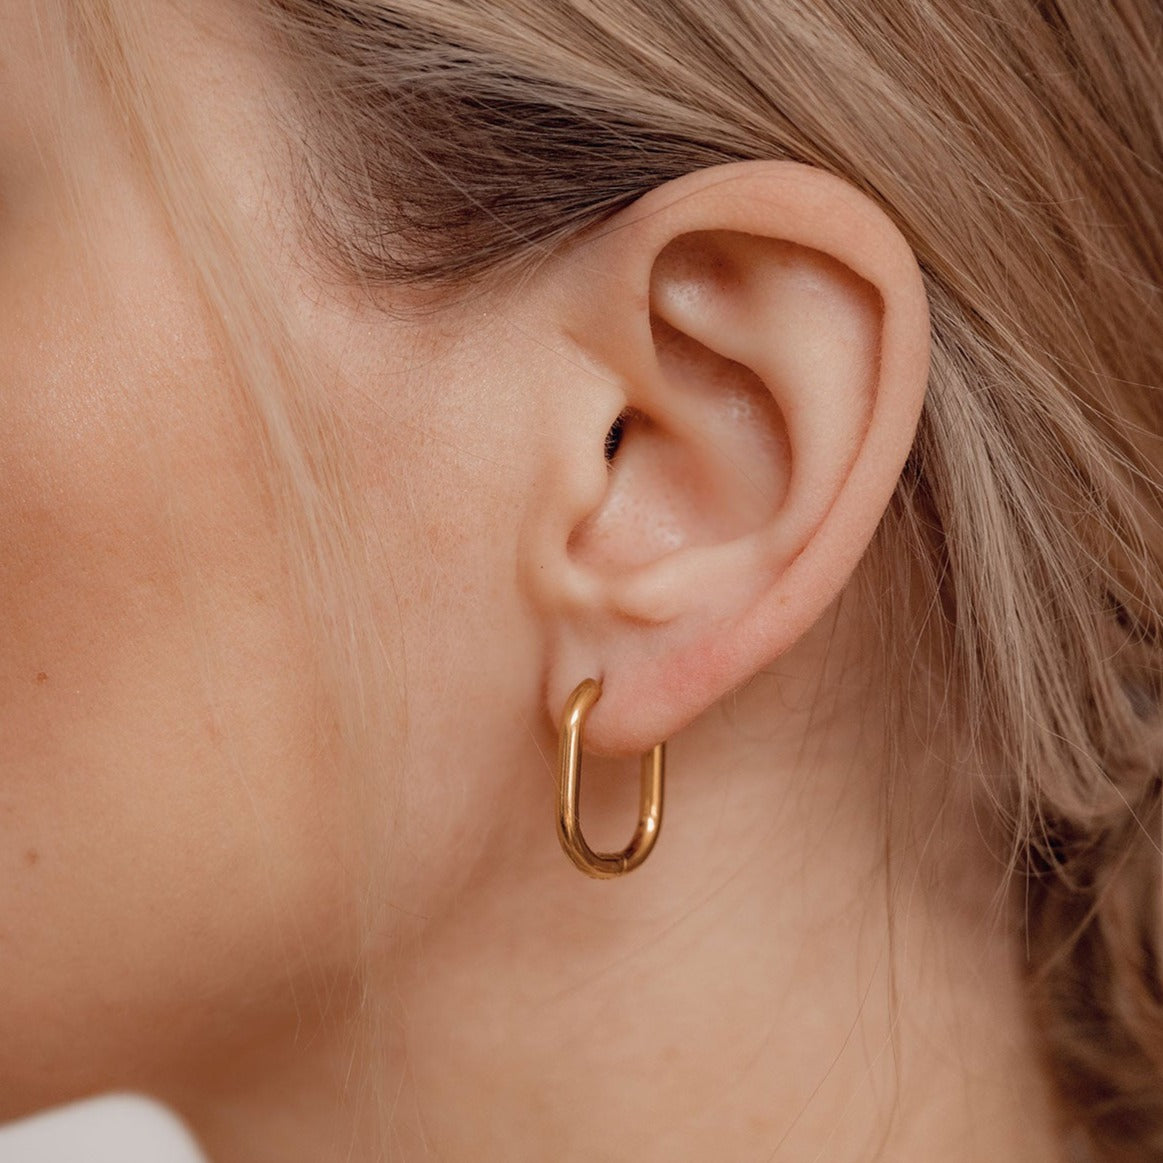 Small Thin Oval Hoop Earrings Gold